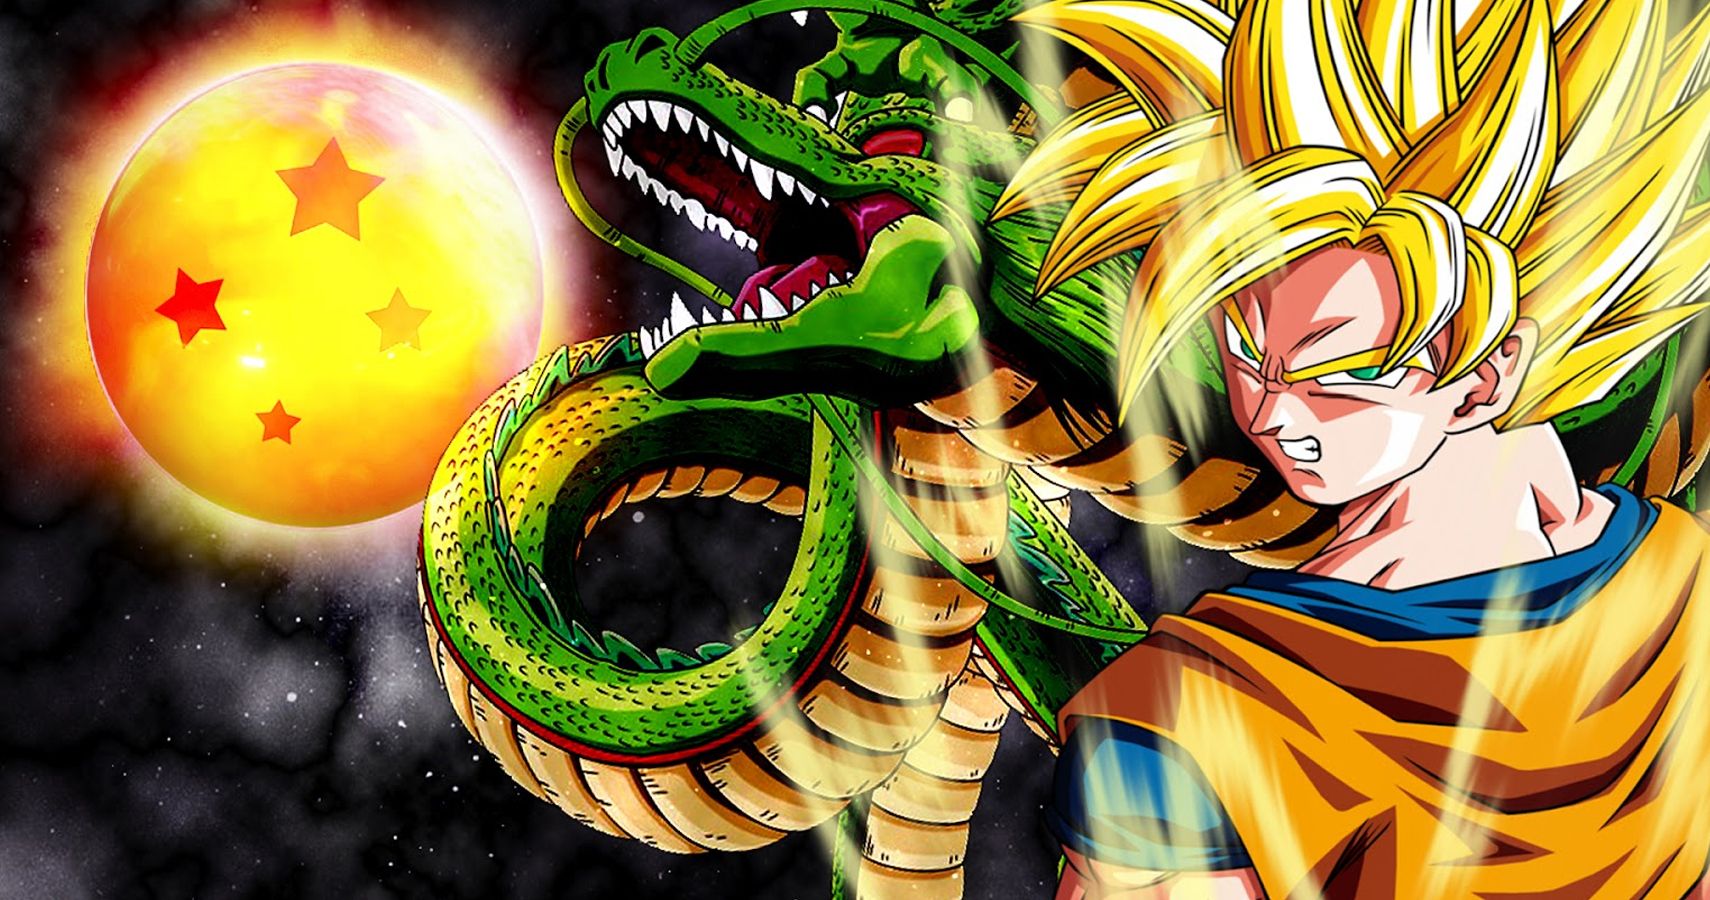 Dragon Ball Super's Strongest Form Can't Compare to Super Saiyan 4